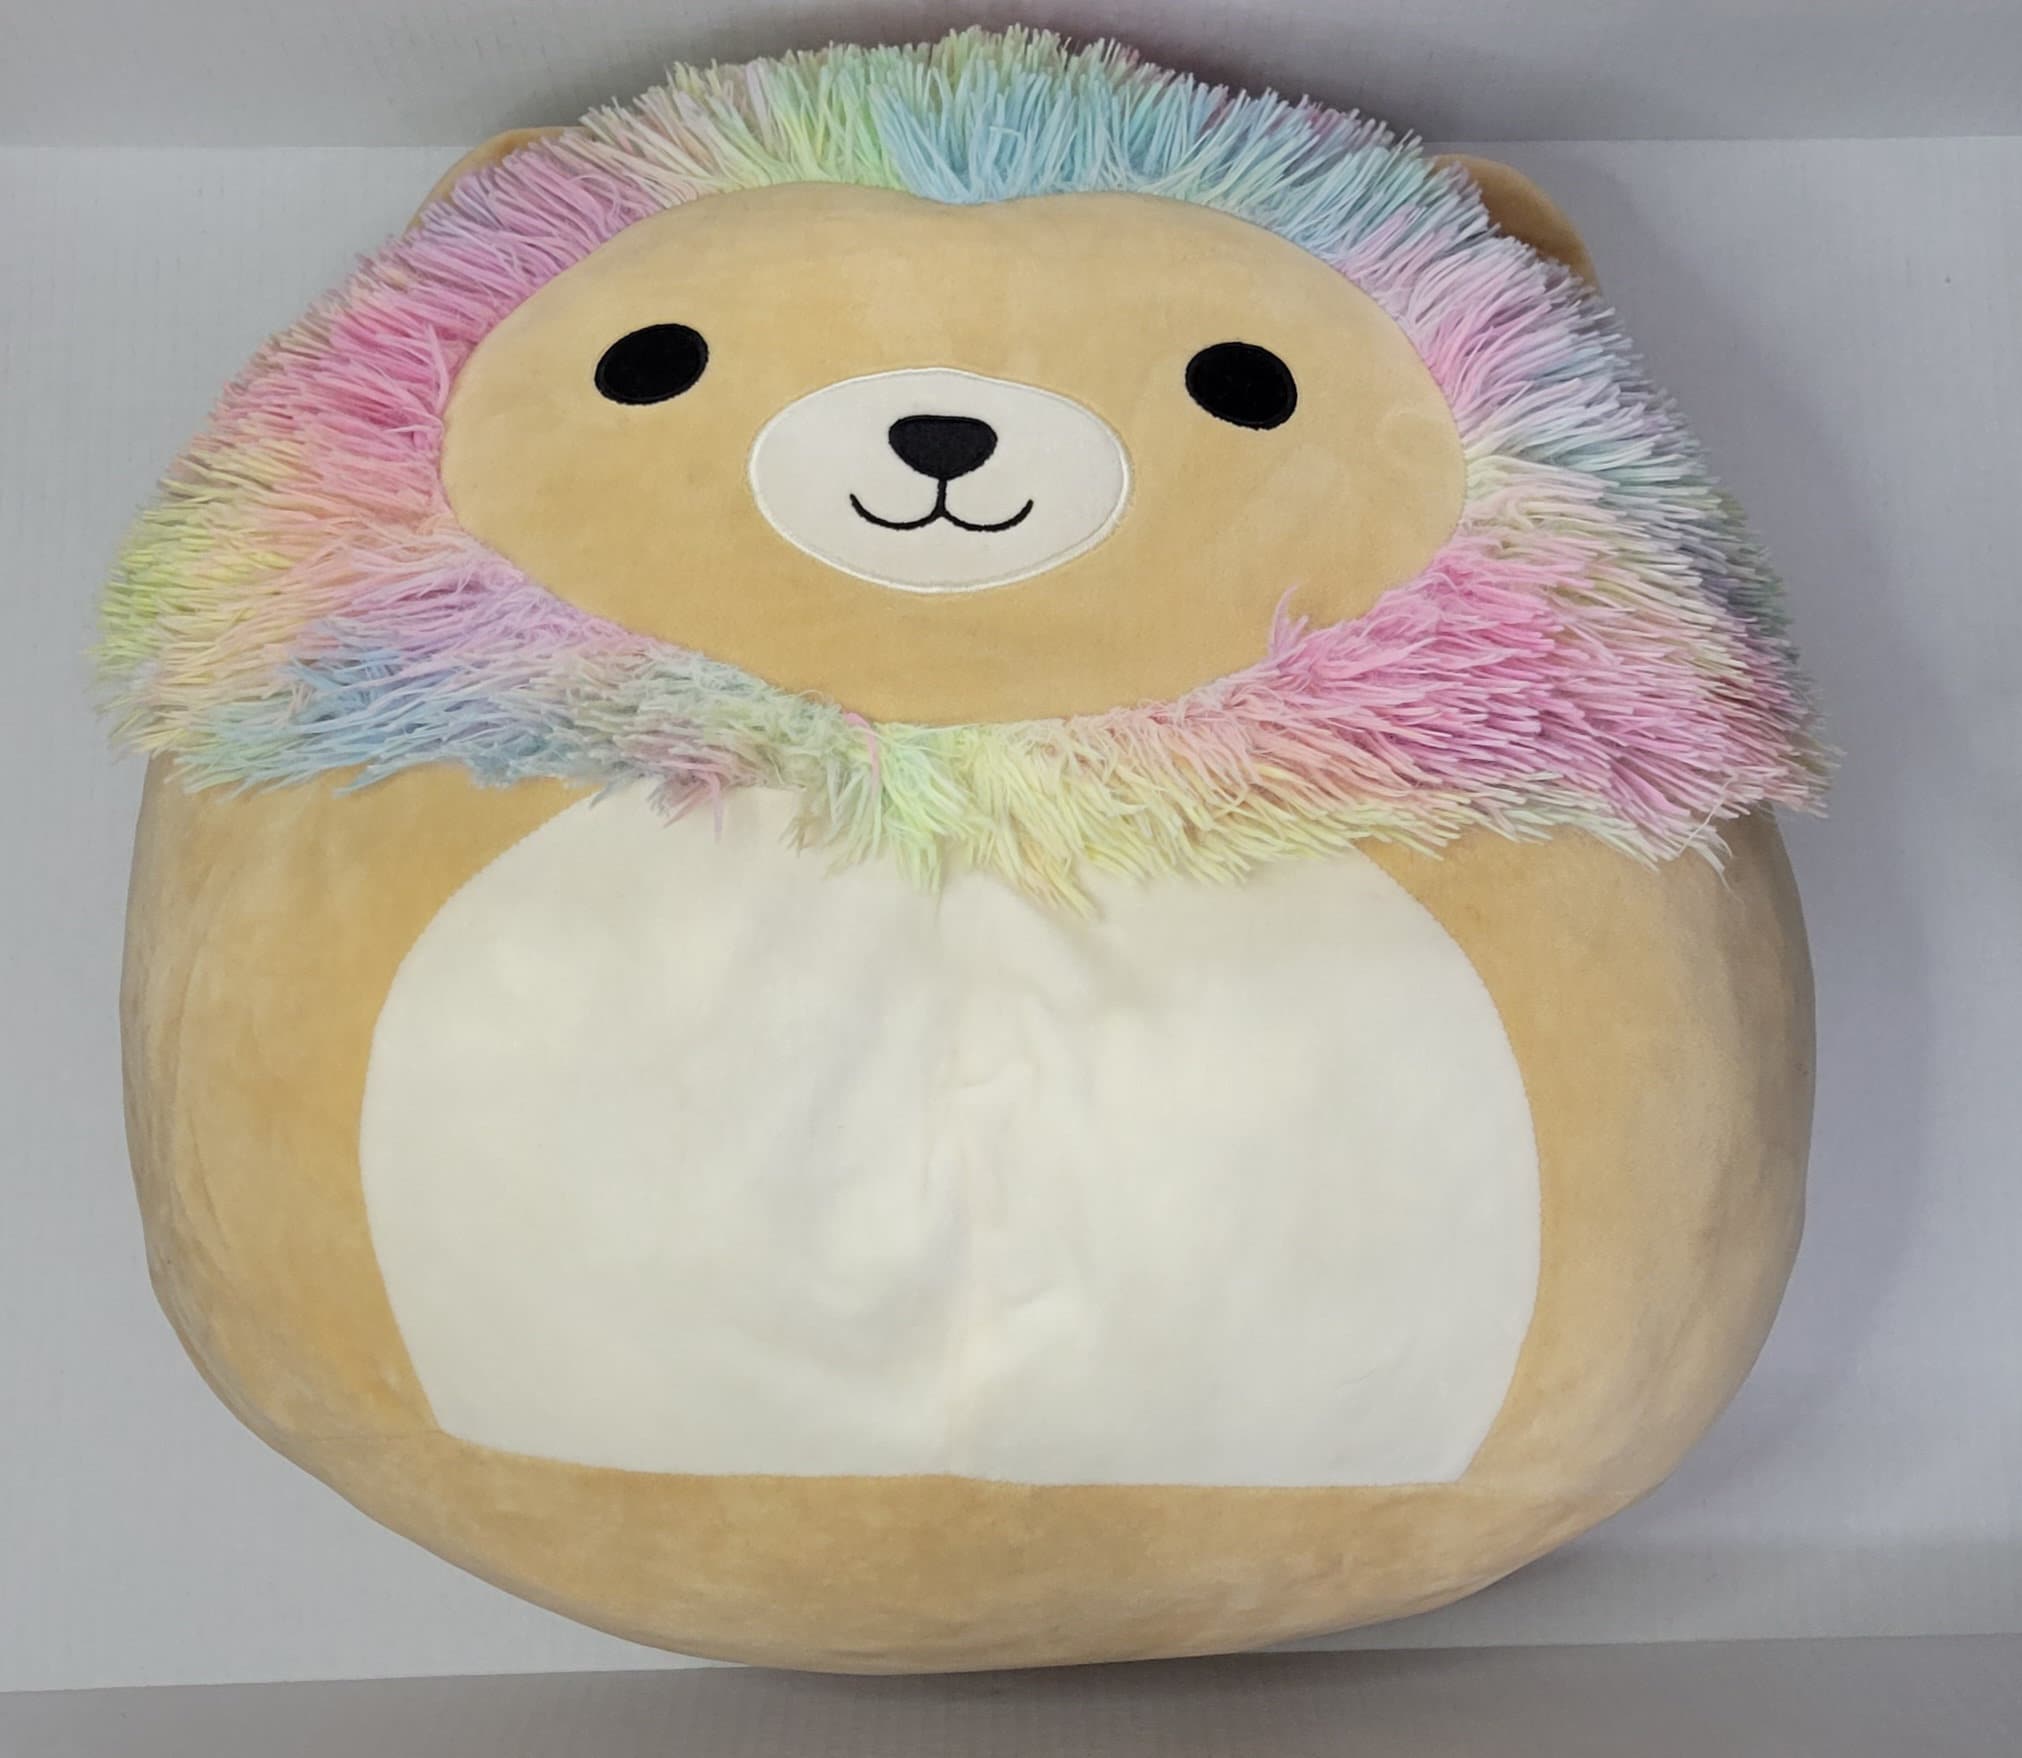 Weighted warmie Squishmallow Stuffed Gryffindor Lion Harry Potter 